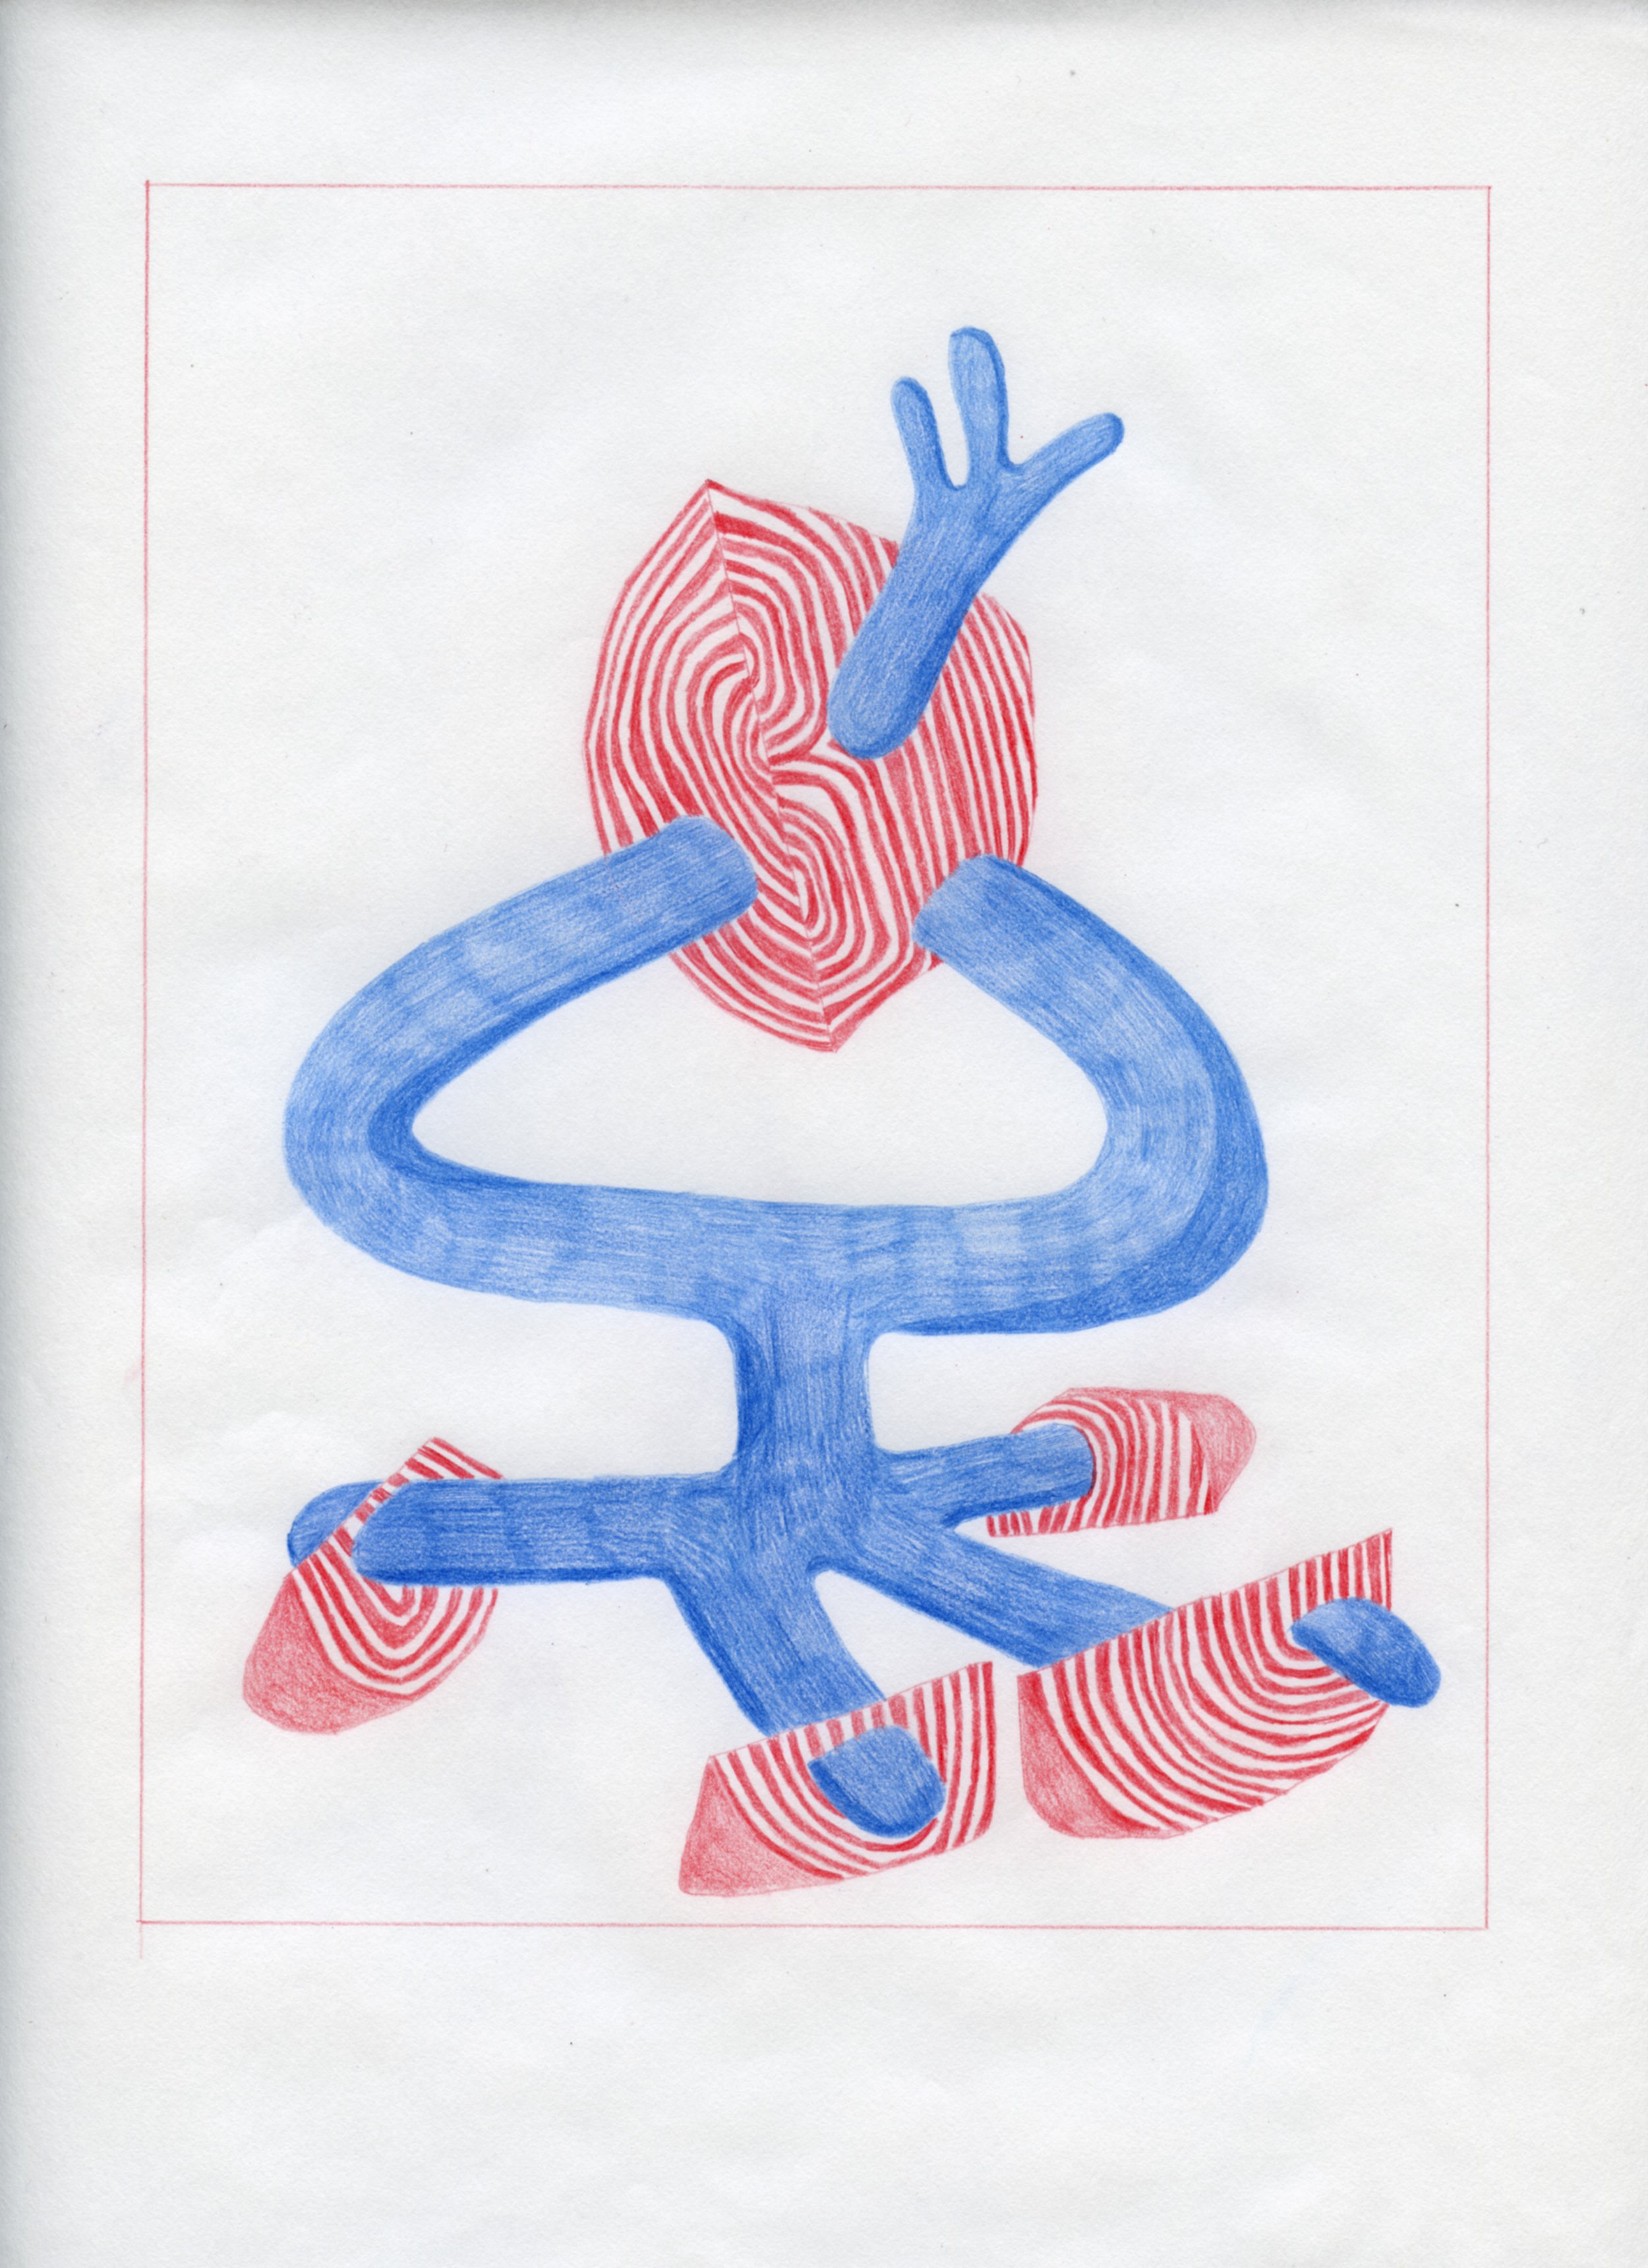  Workplace Drawing #24, 2021, Red and Blue Graphite on Bond Paper, 9”x 12”. 